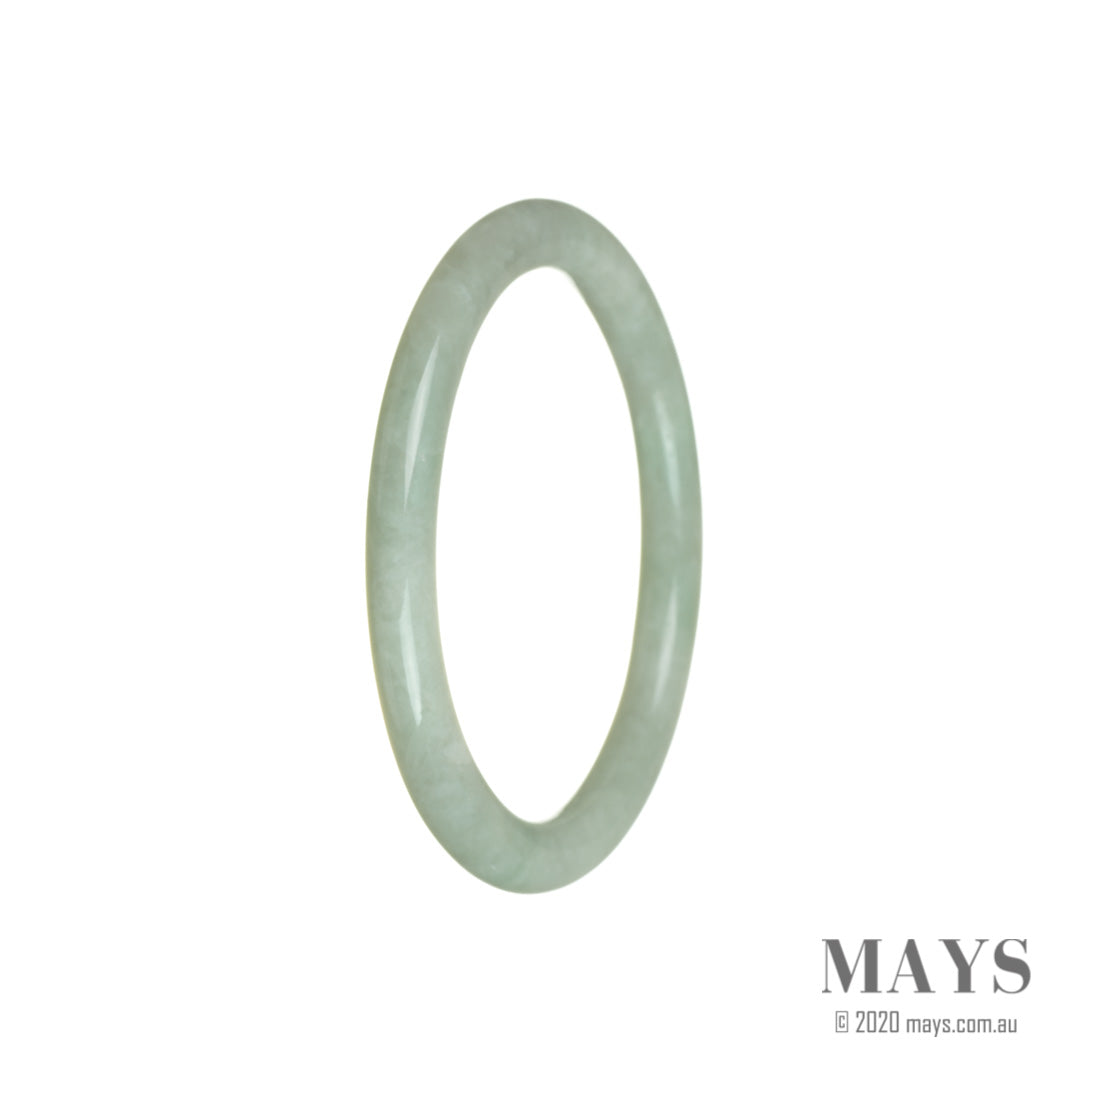 A delicate, 55mm thin, authentic Grade A green jade bracelet by MAYS.